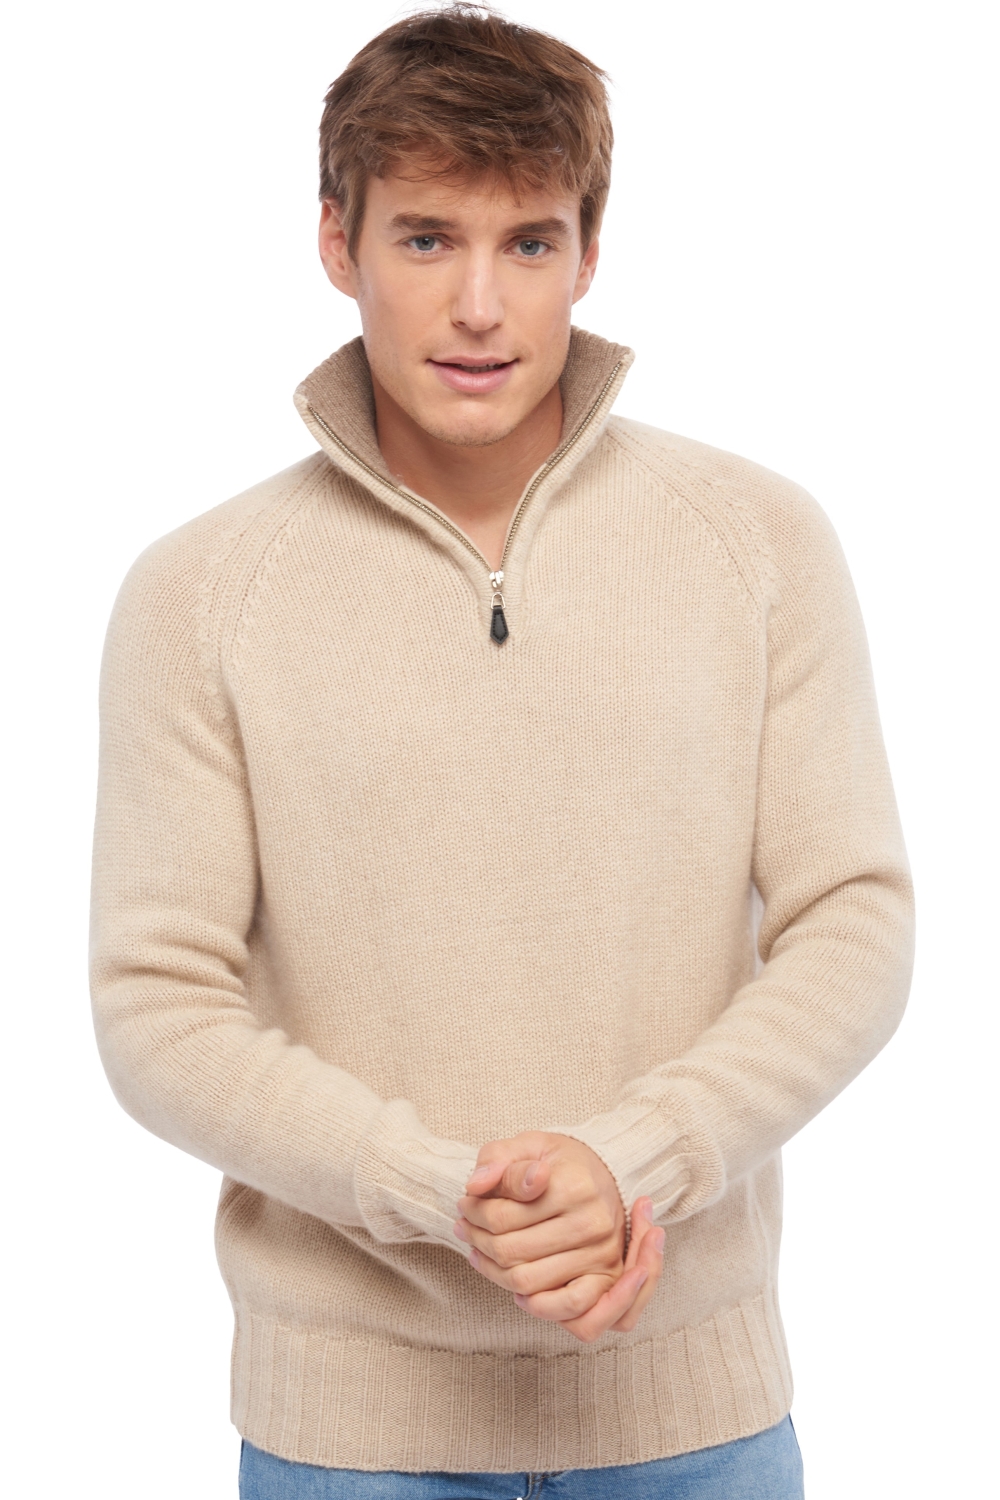 Cashmere men polo style sweaters olivier natural beige natural brown xl